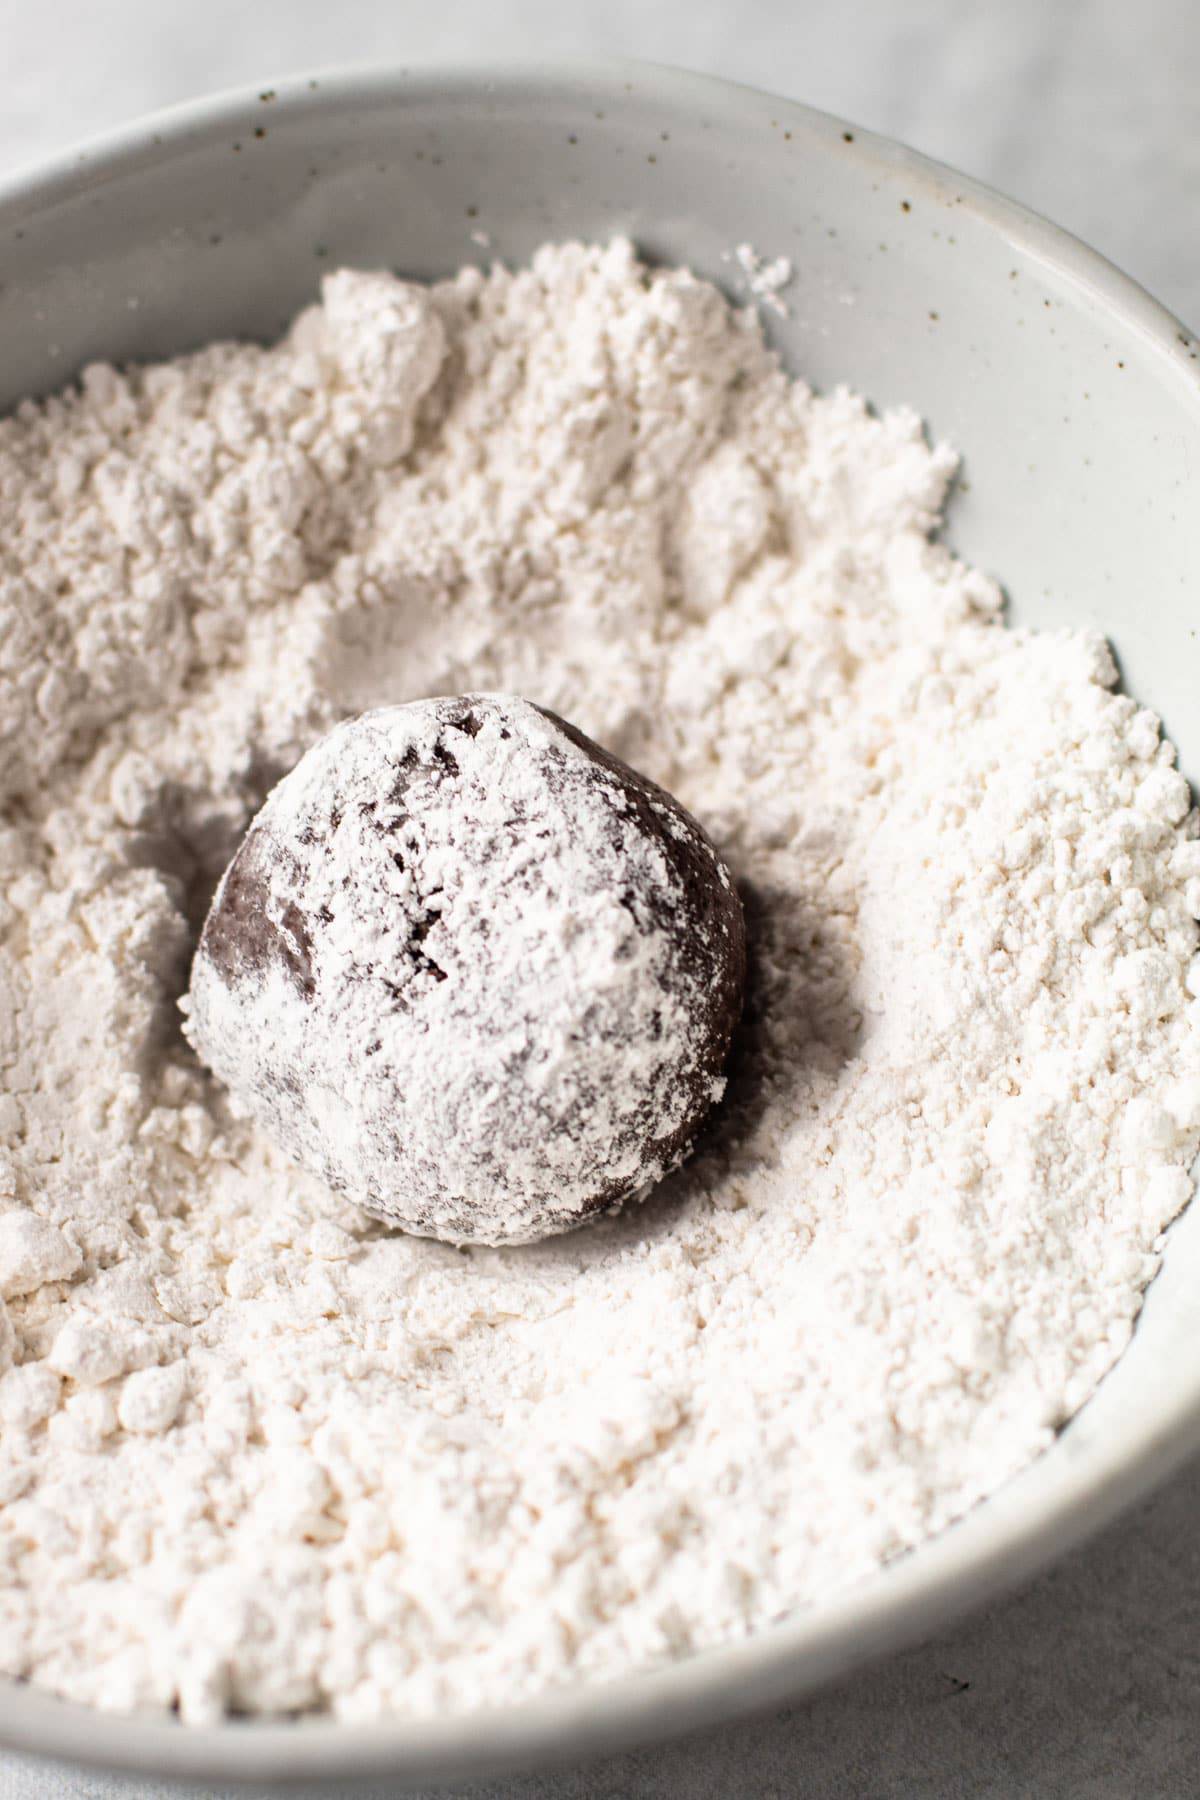 Chocolate cookie dough being coated in powdered sugar.